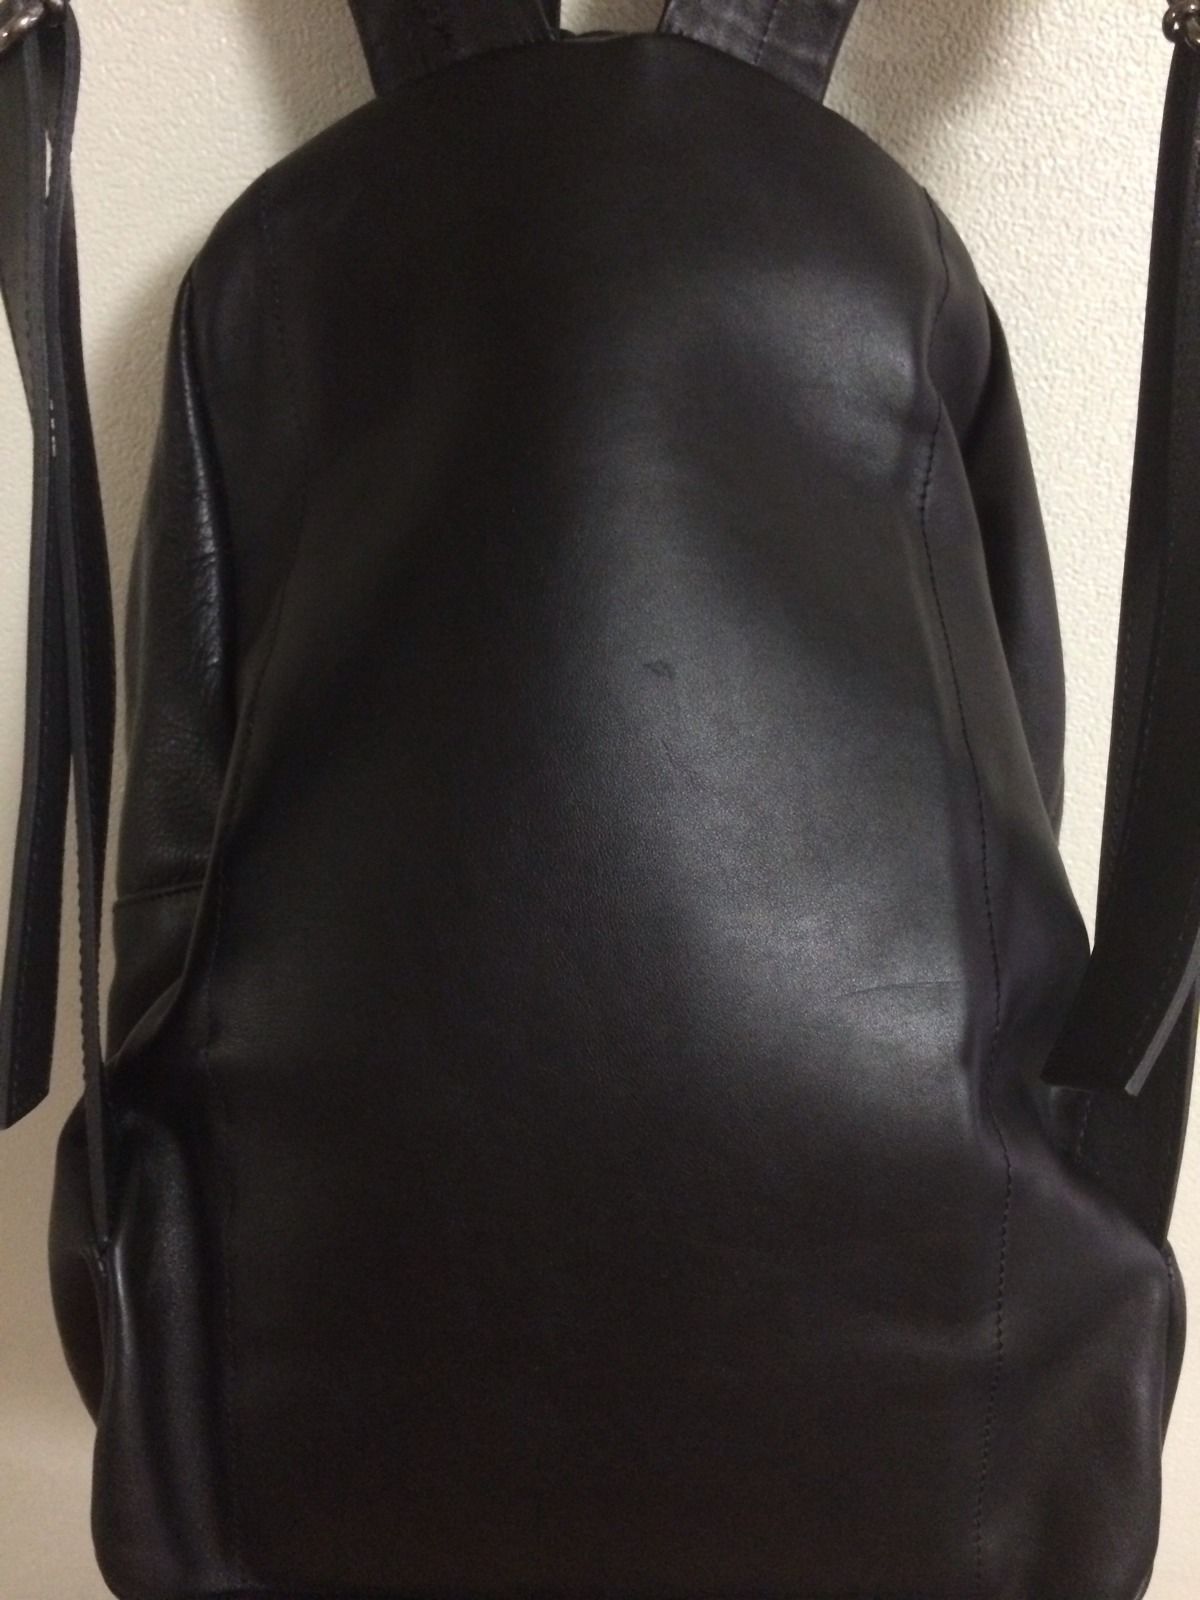 Common Projects Black Leather Backpack Size ONE SIZE - 2 Preview